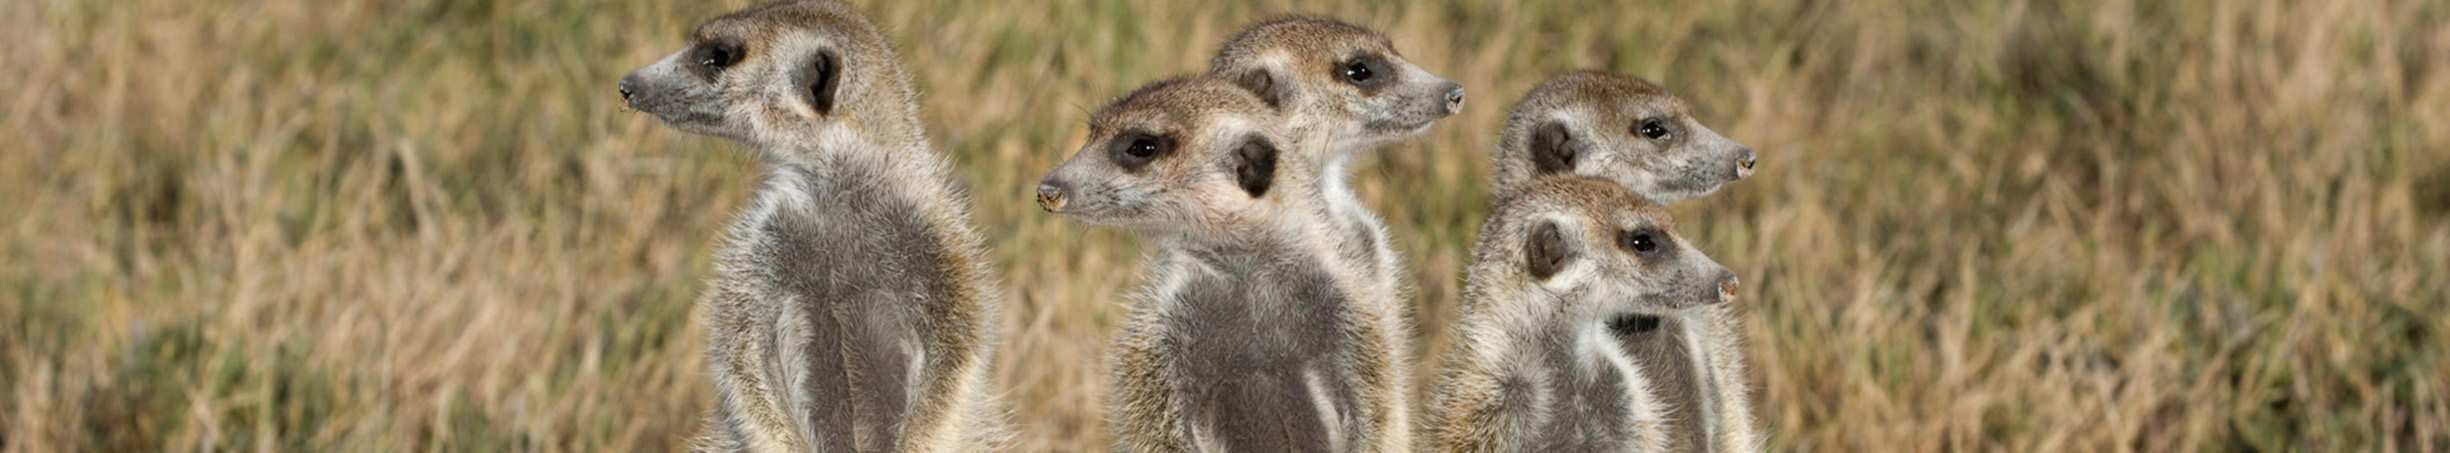 Meerkats are ever watchful and so are the team at Security Alarm Monitoring Service which is why they are the best Wholesale Bureau Alarm Monitoring Service in Australia.